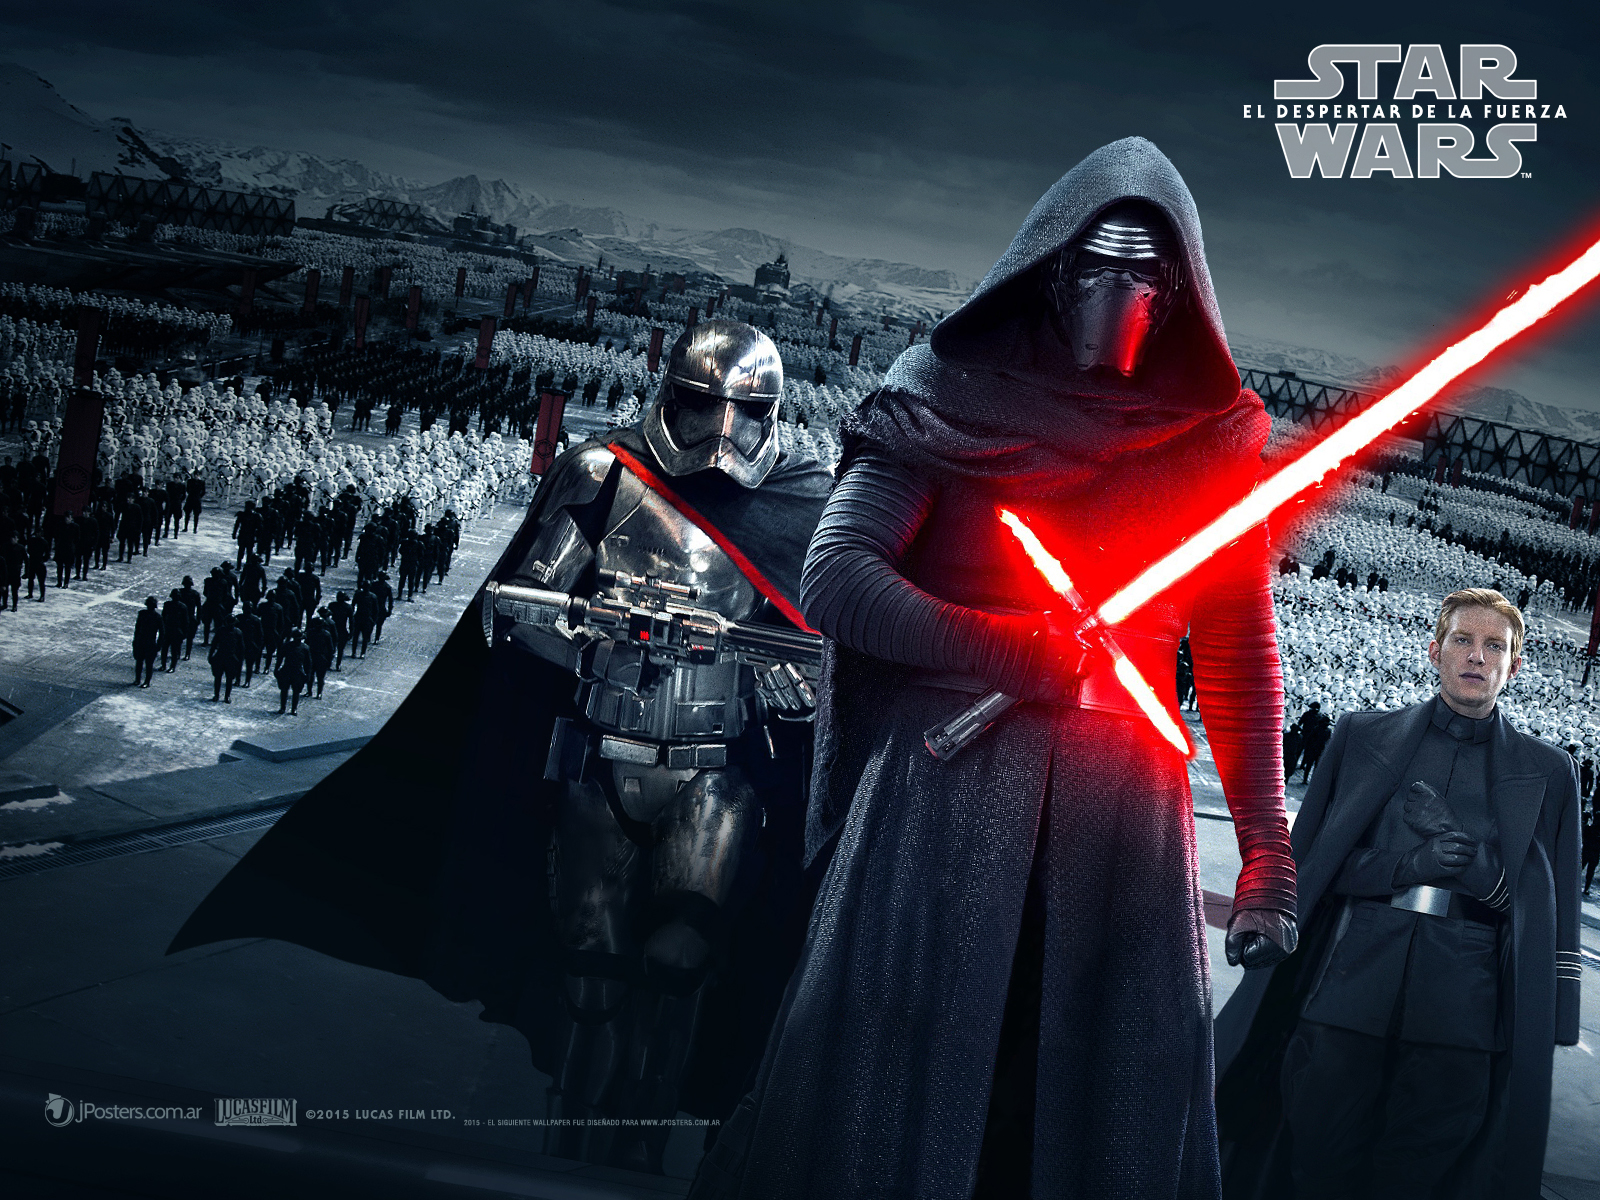 Episode VII 8 wallpapers of Star Wars   The Force Awakens   Tiwula 1600x1200